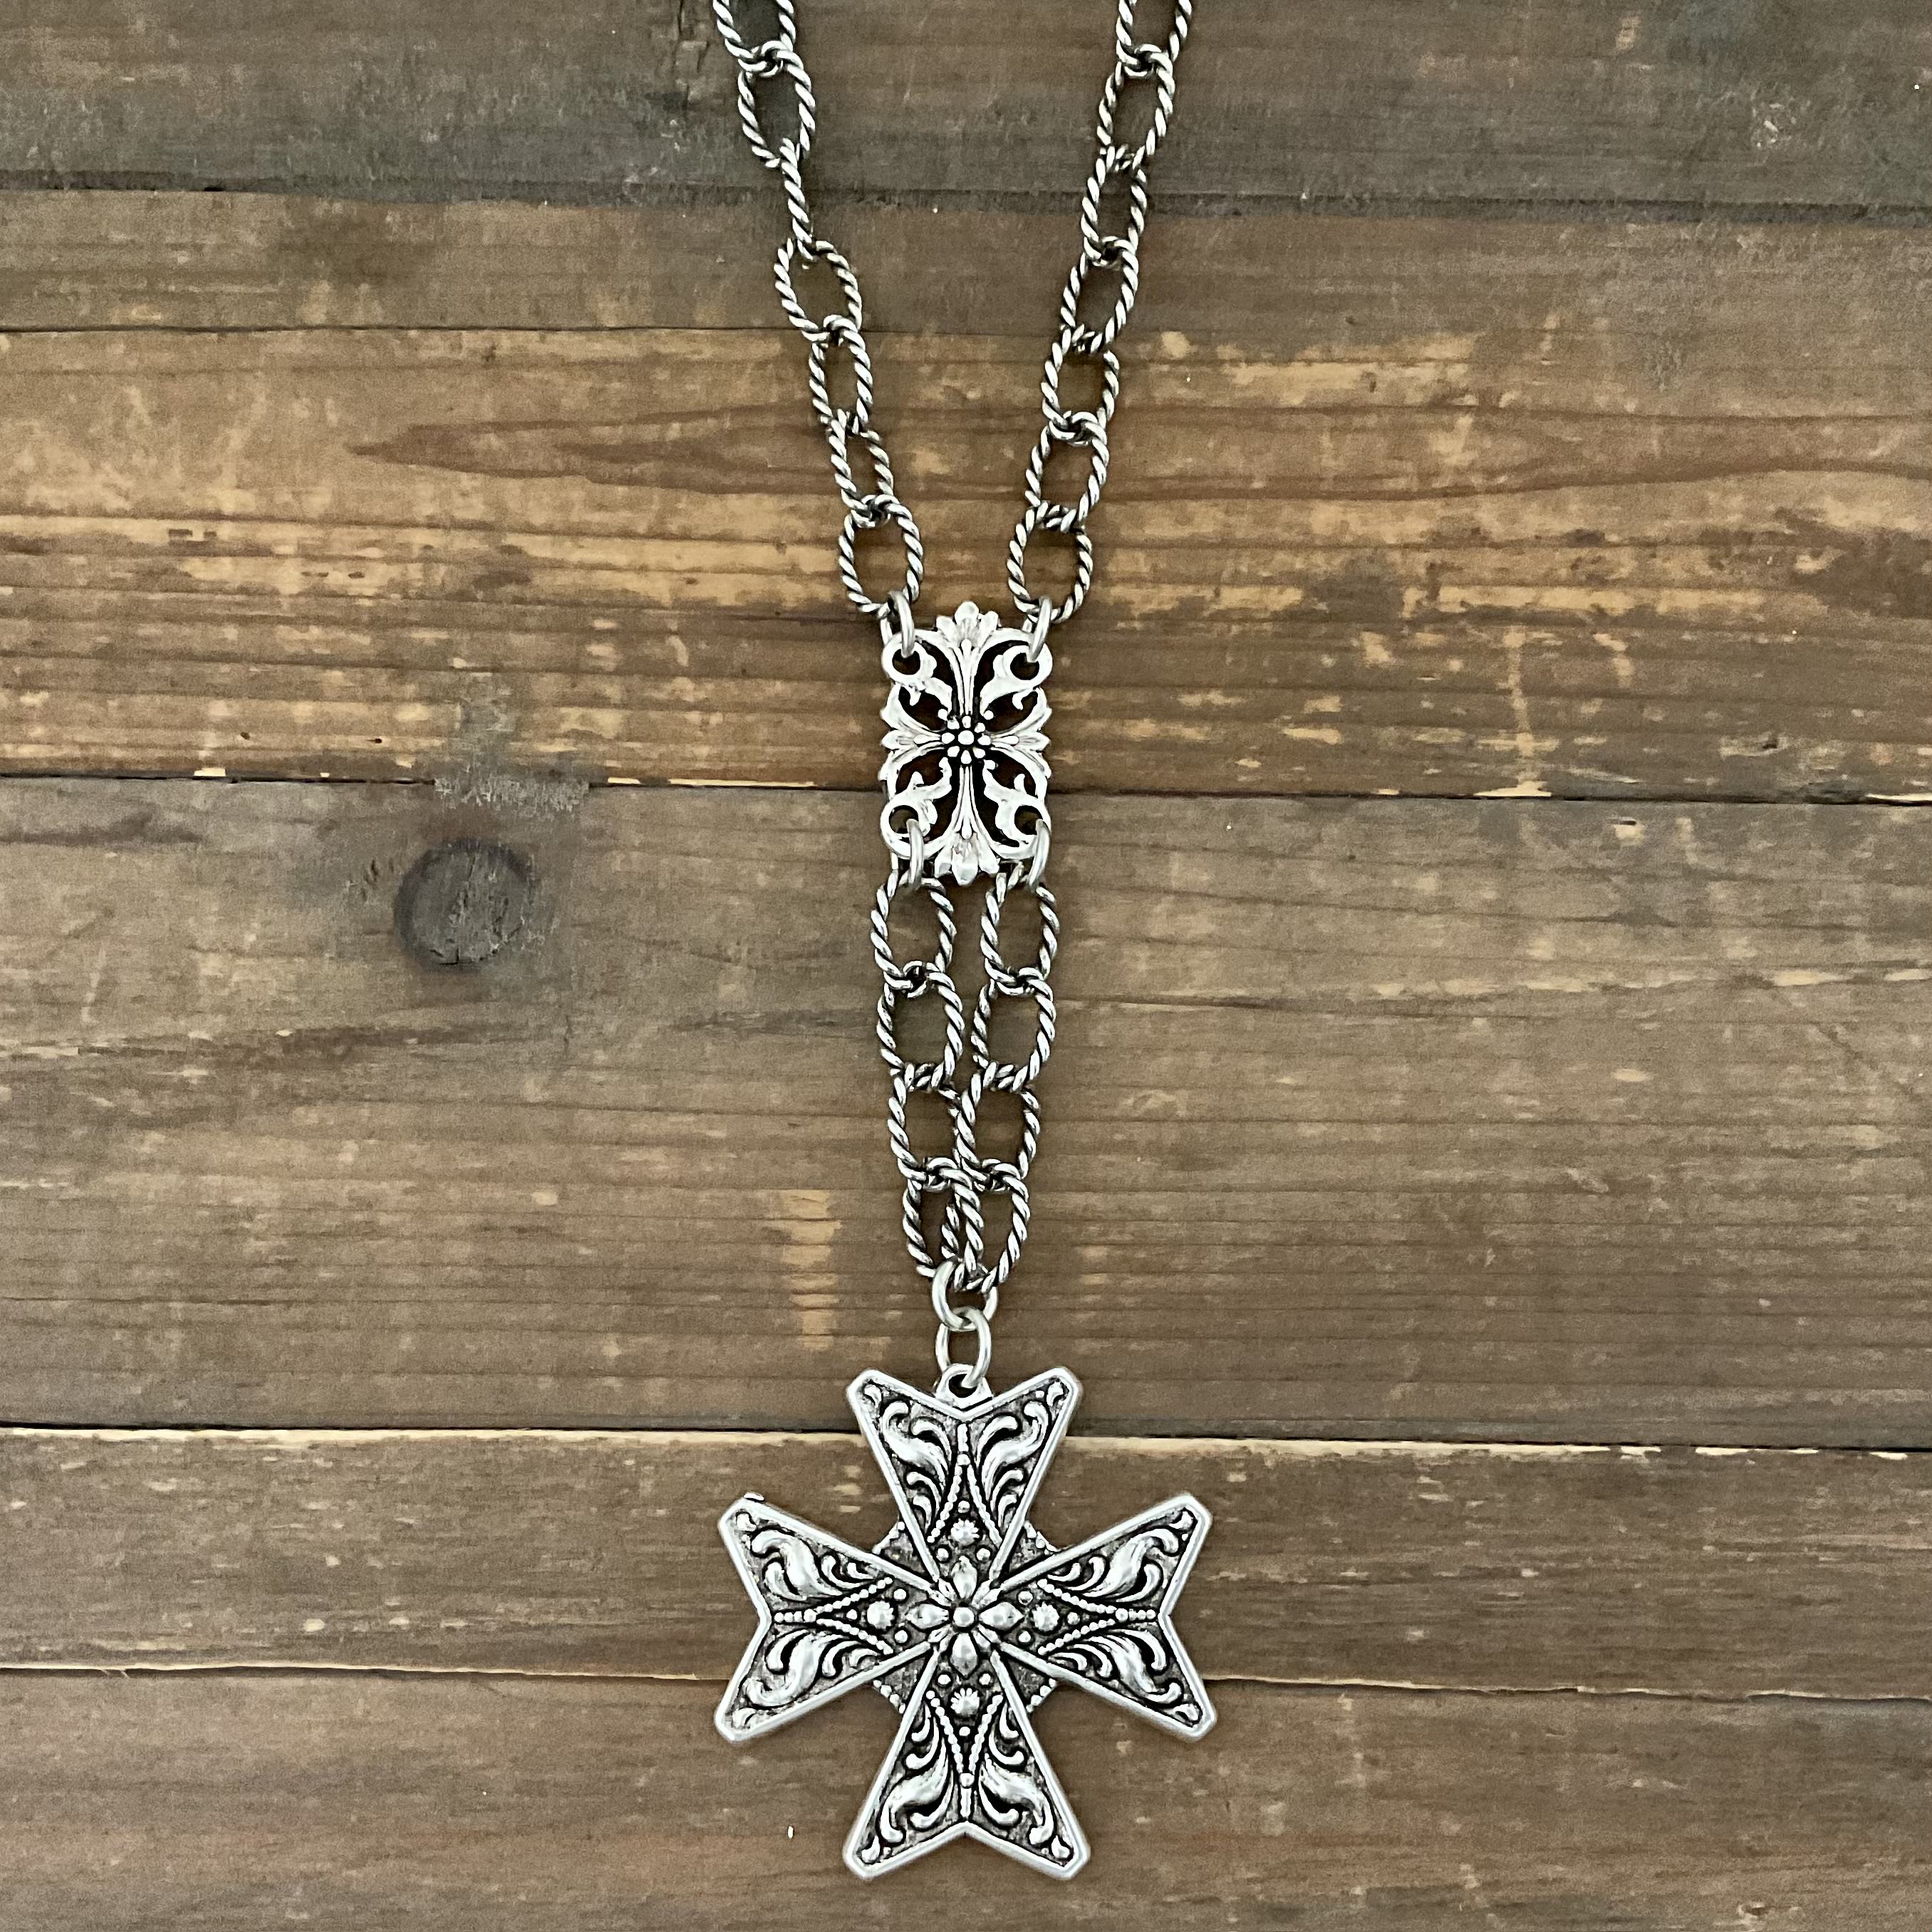 Sterling Plated 36" Chain with Vintage Cross Pendant